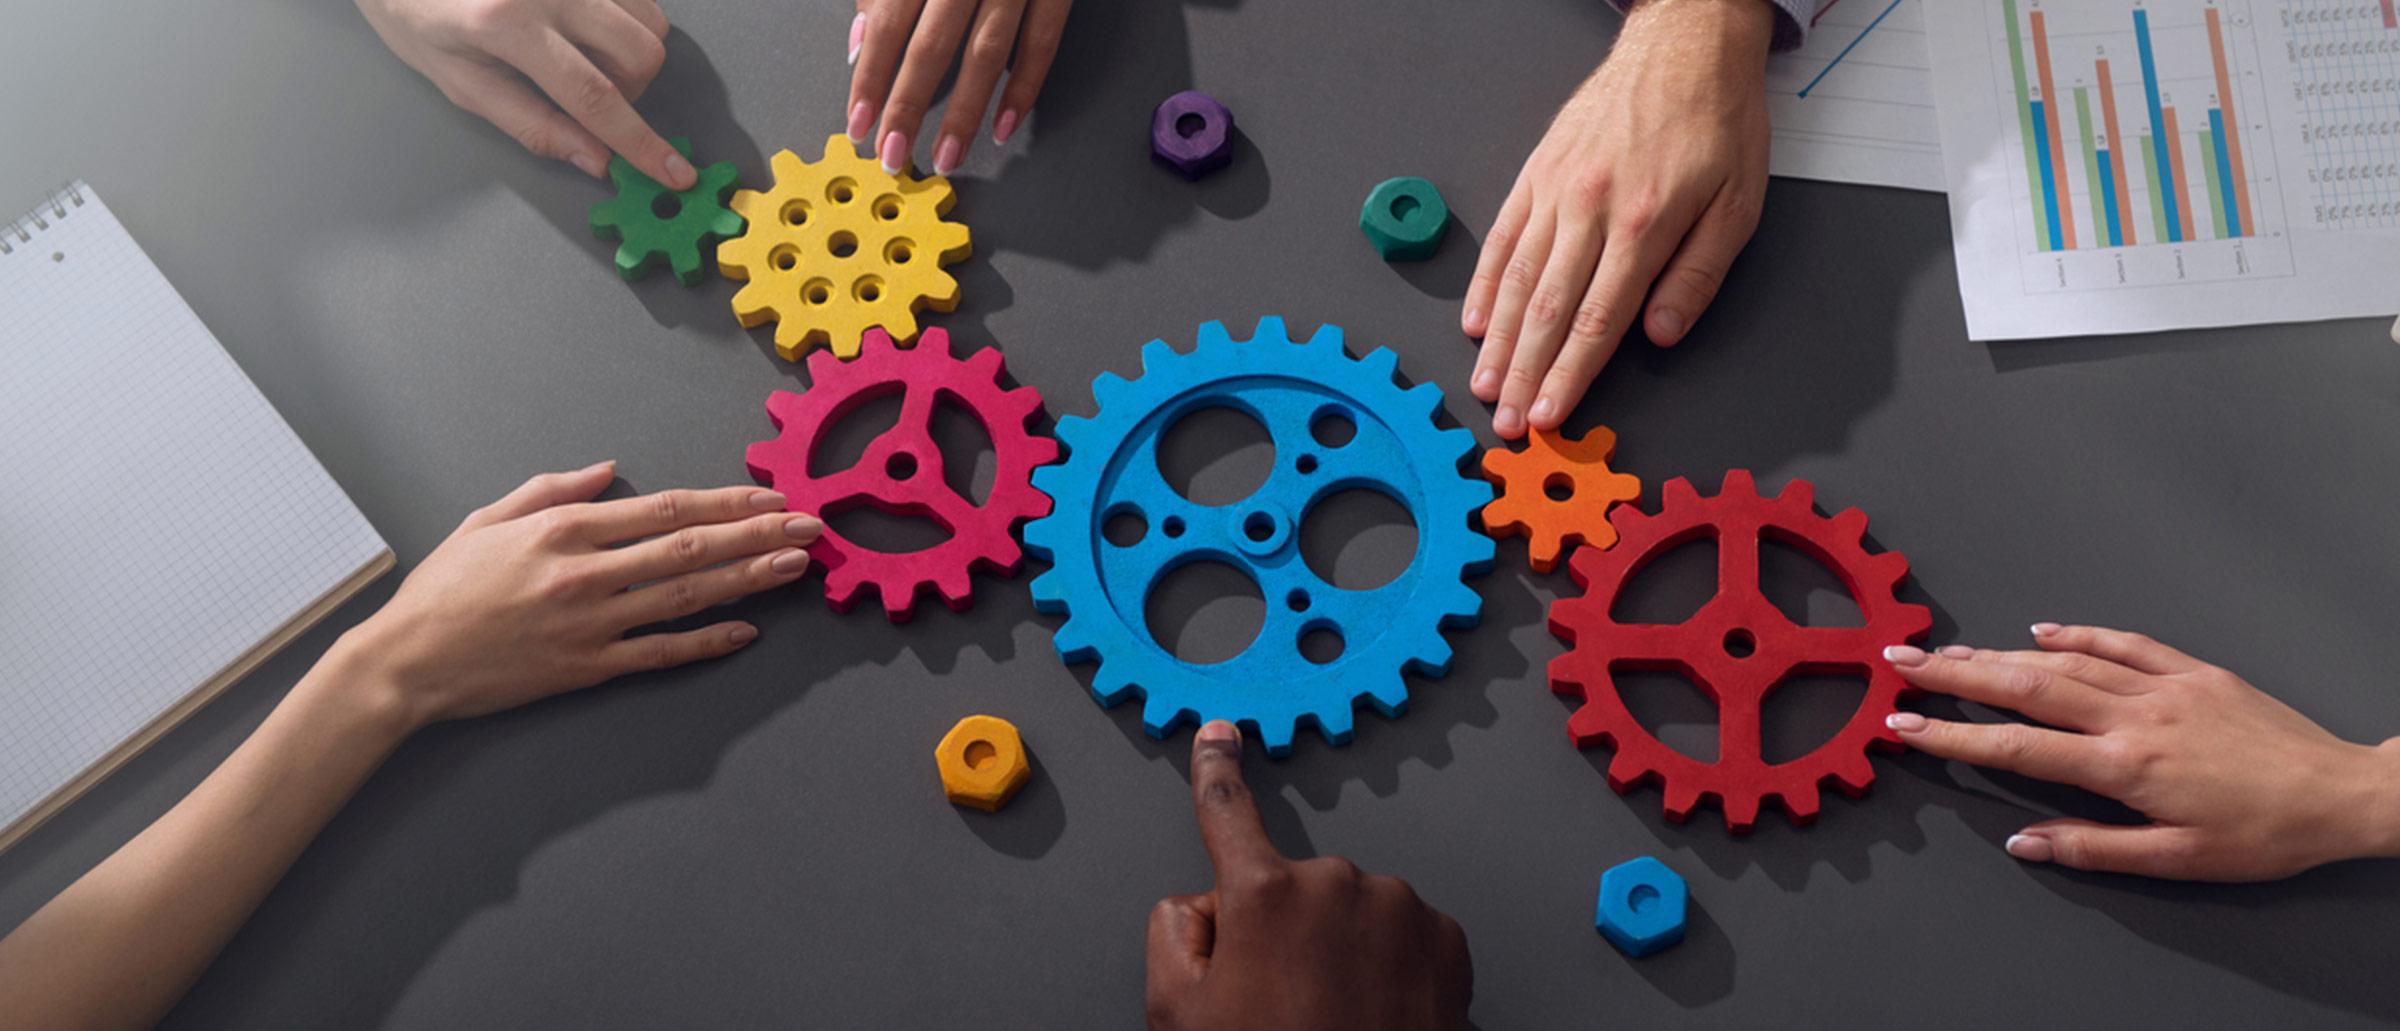 Six hands turning multi-colored spokes and gears on a black table that also has a data sheet and notebook